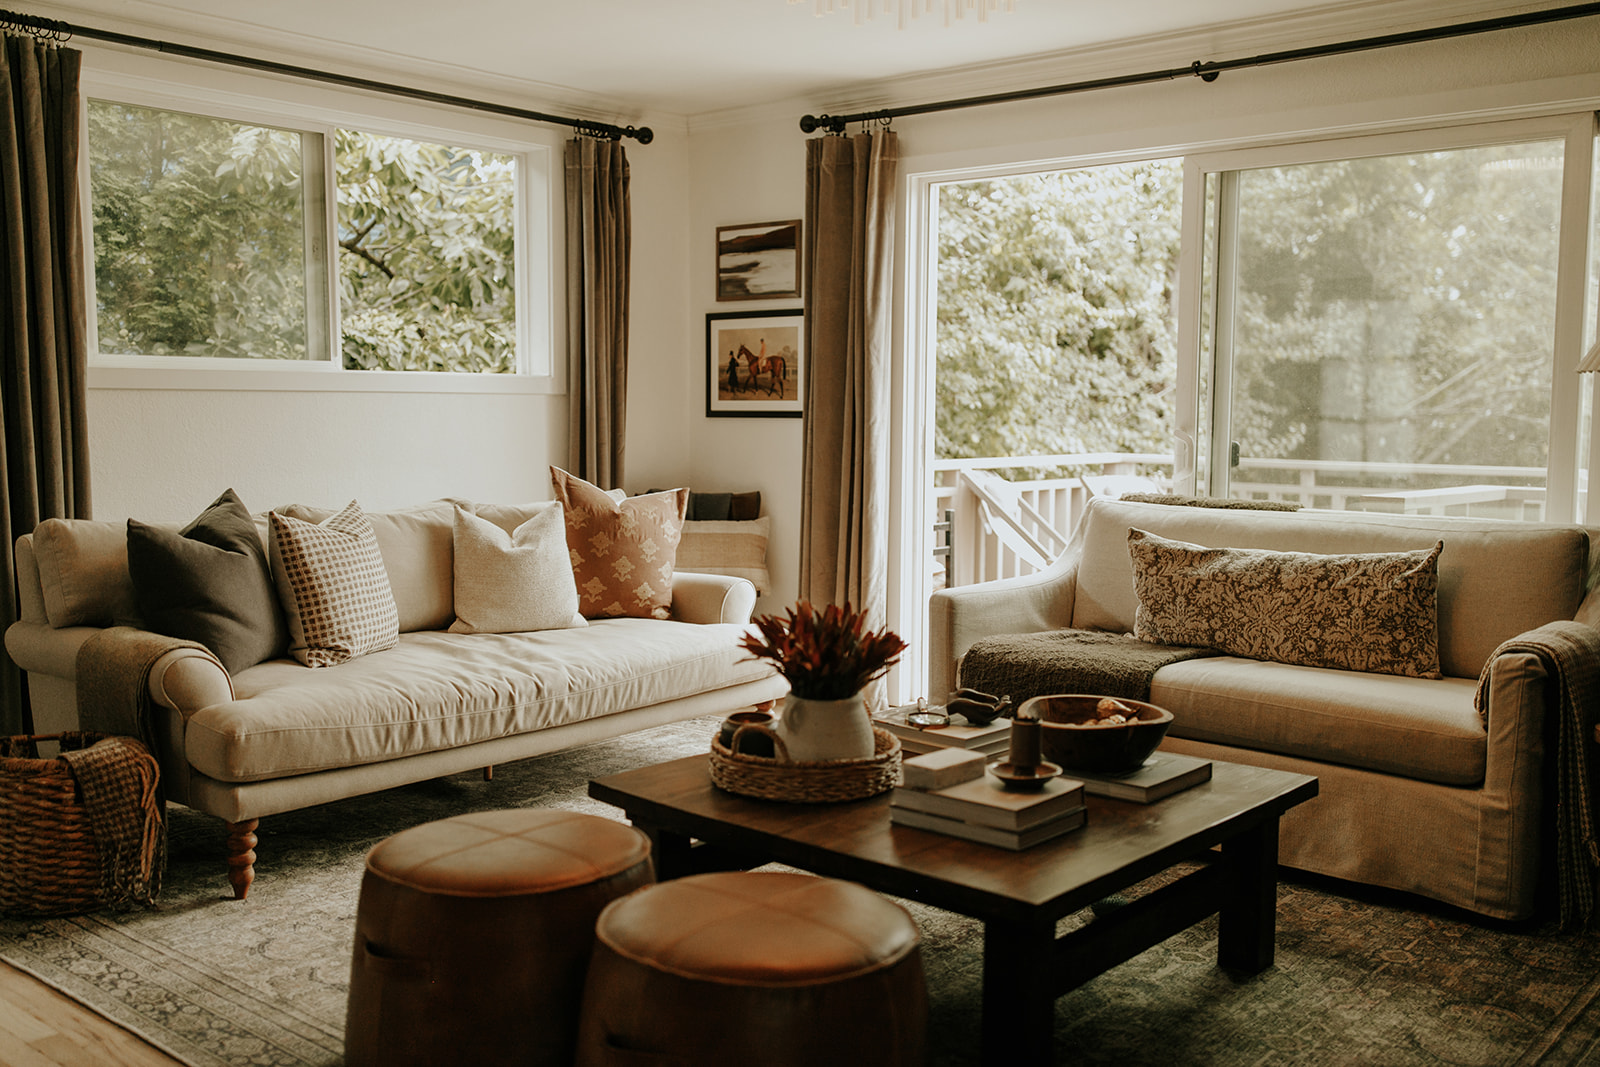 The living room in the Fairhaven Home, with two couches, pillows, a coffee table and curtains